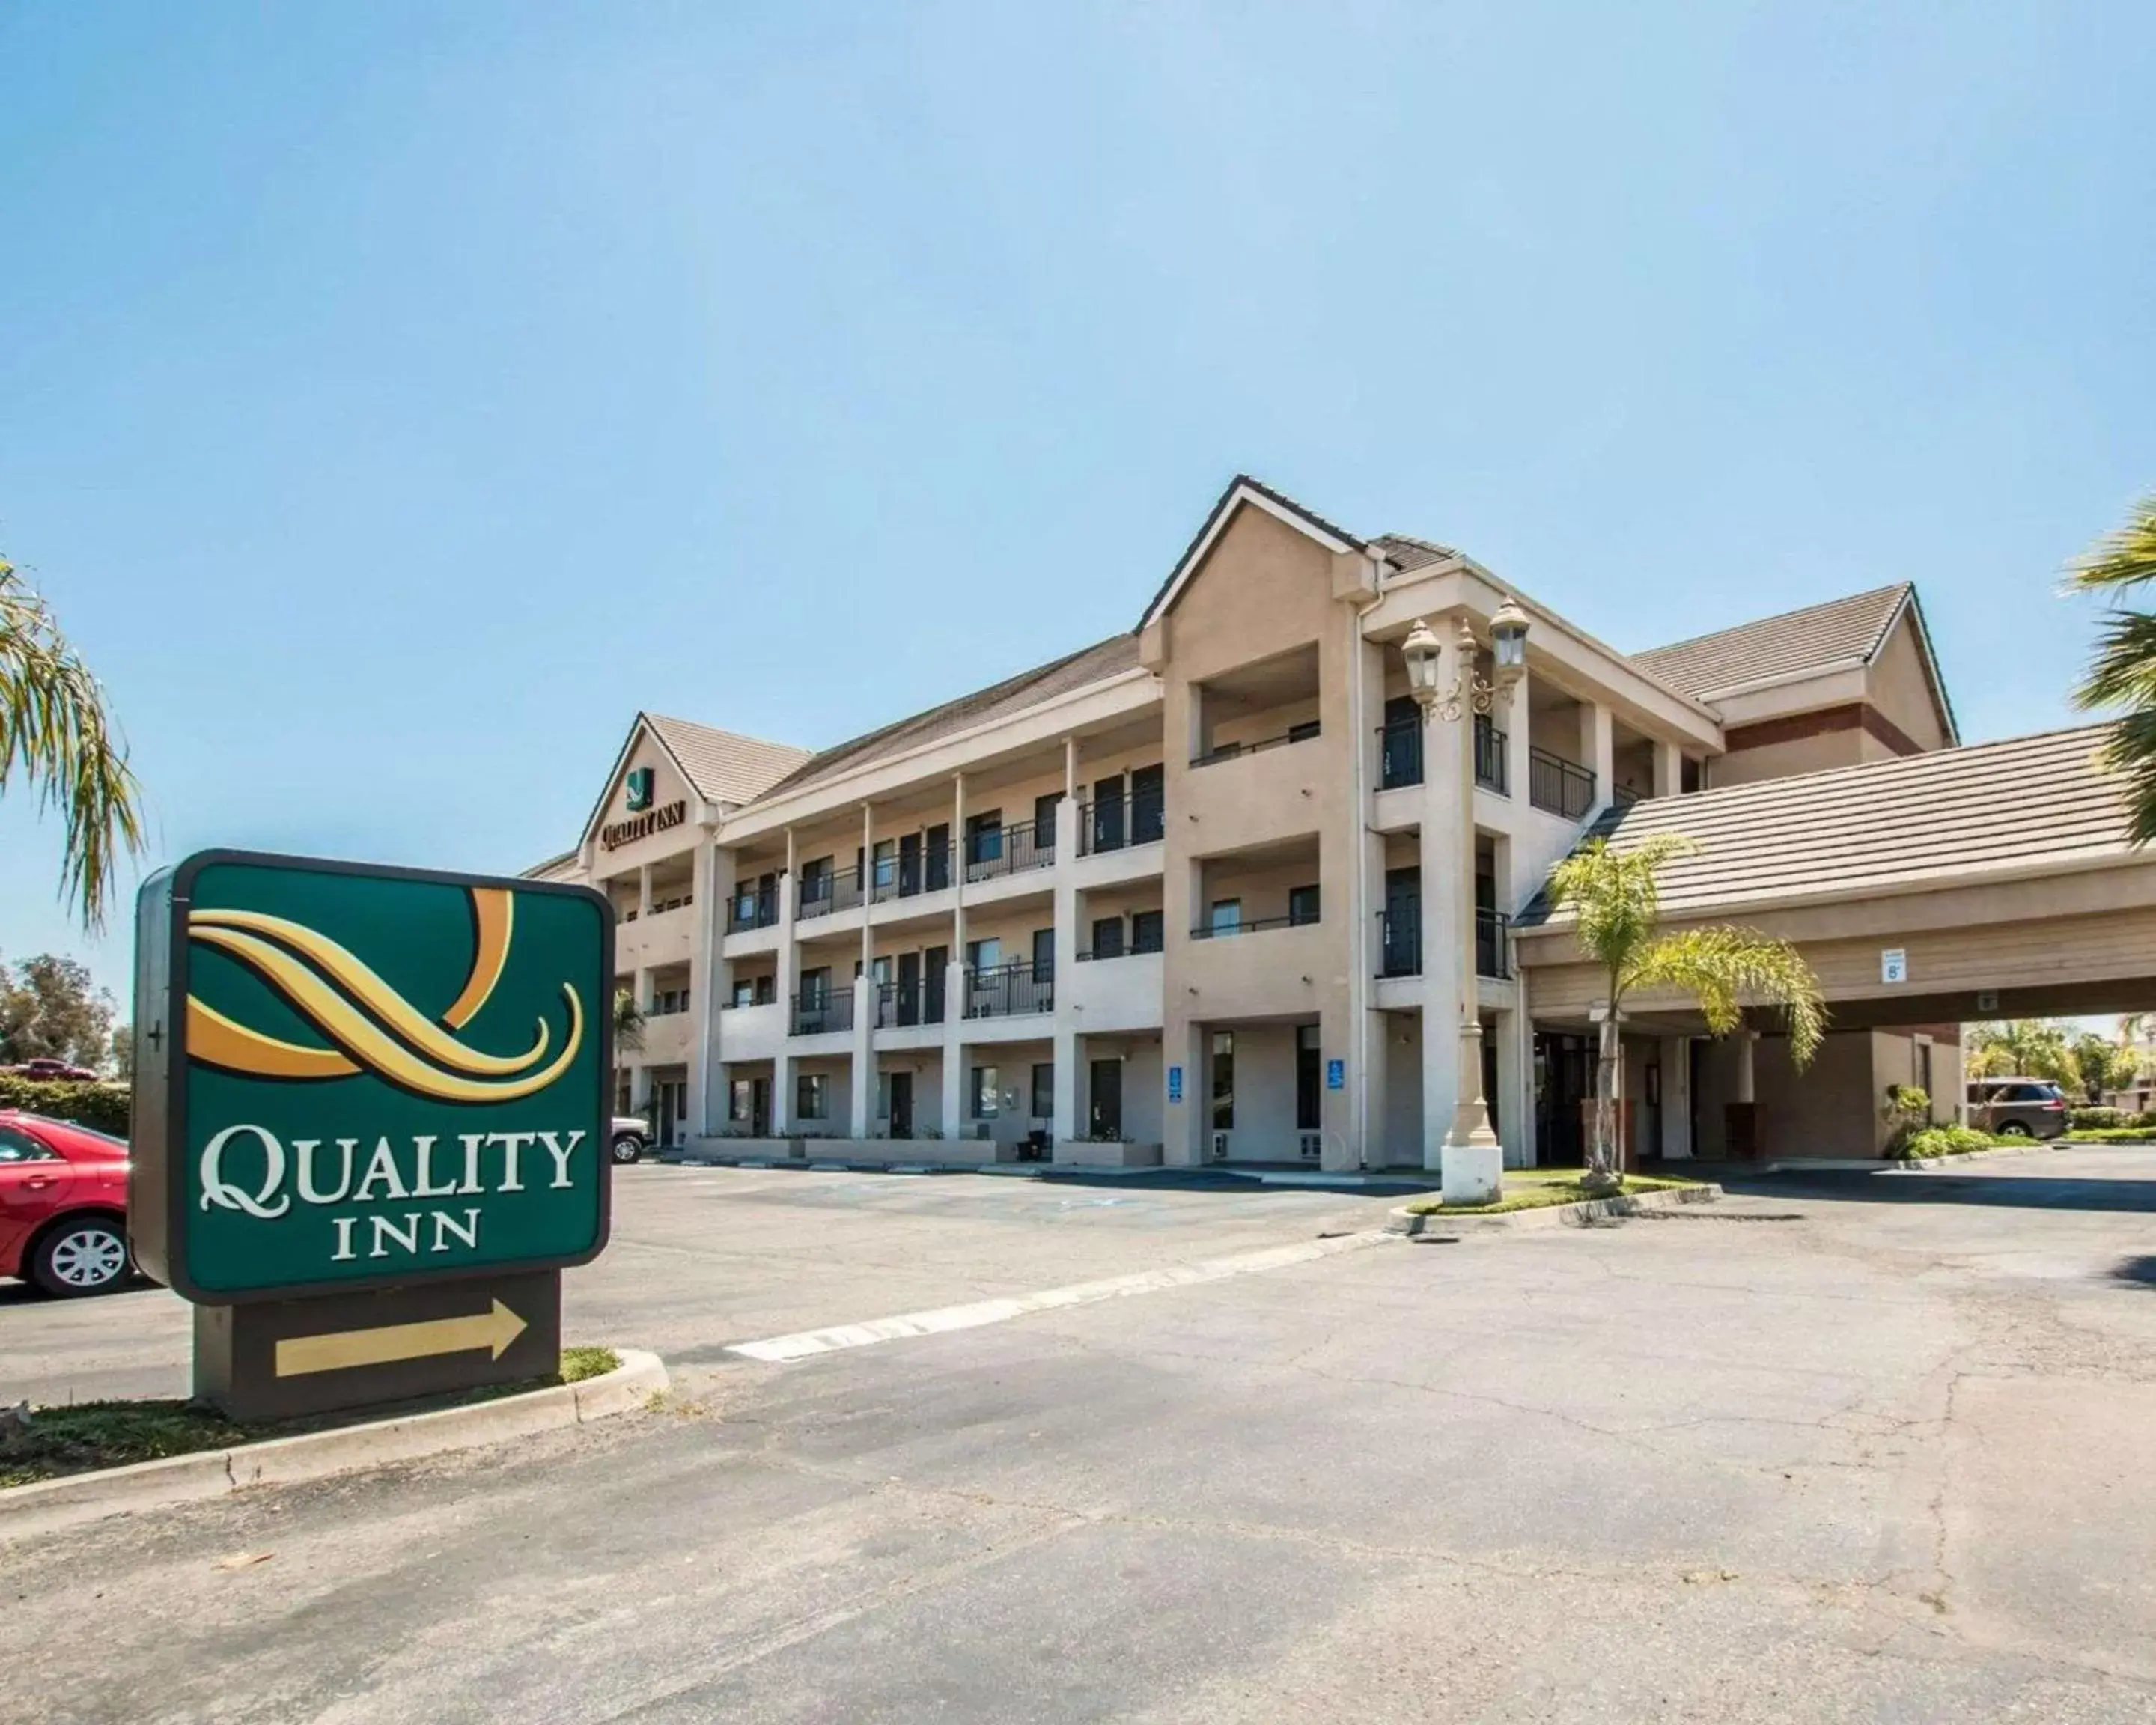 Property Building in Quality Inn Temecula Valley Wine Country